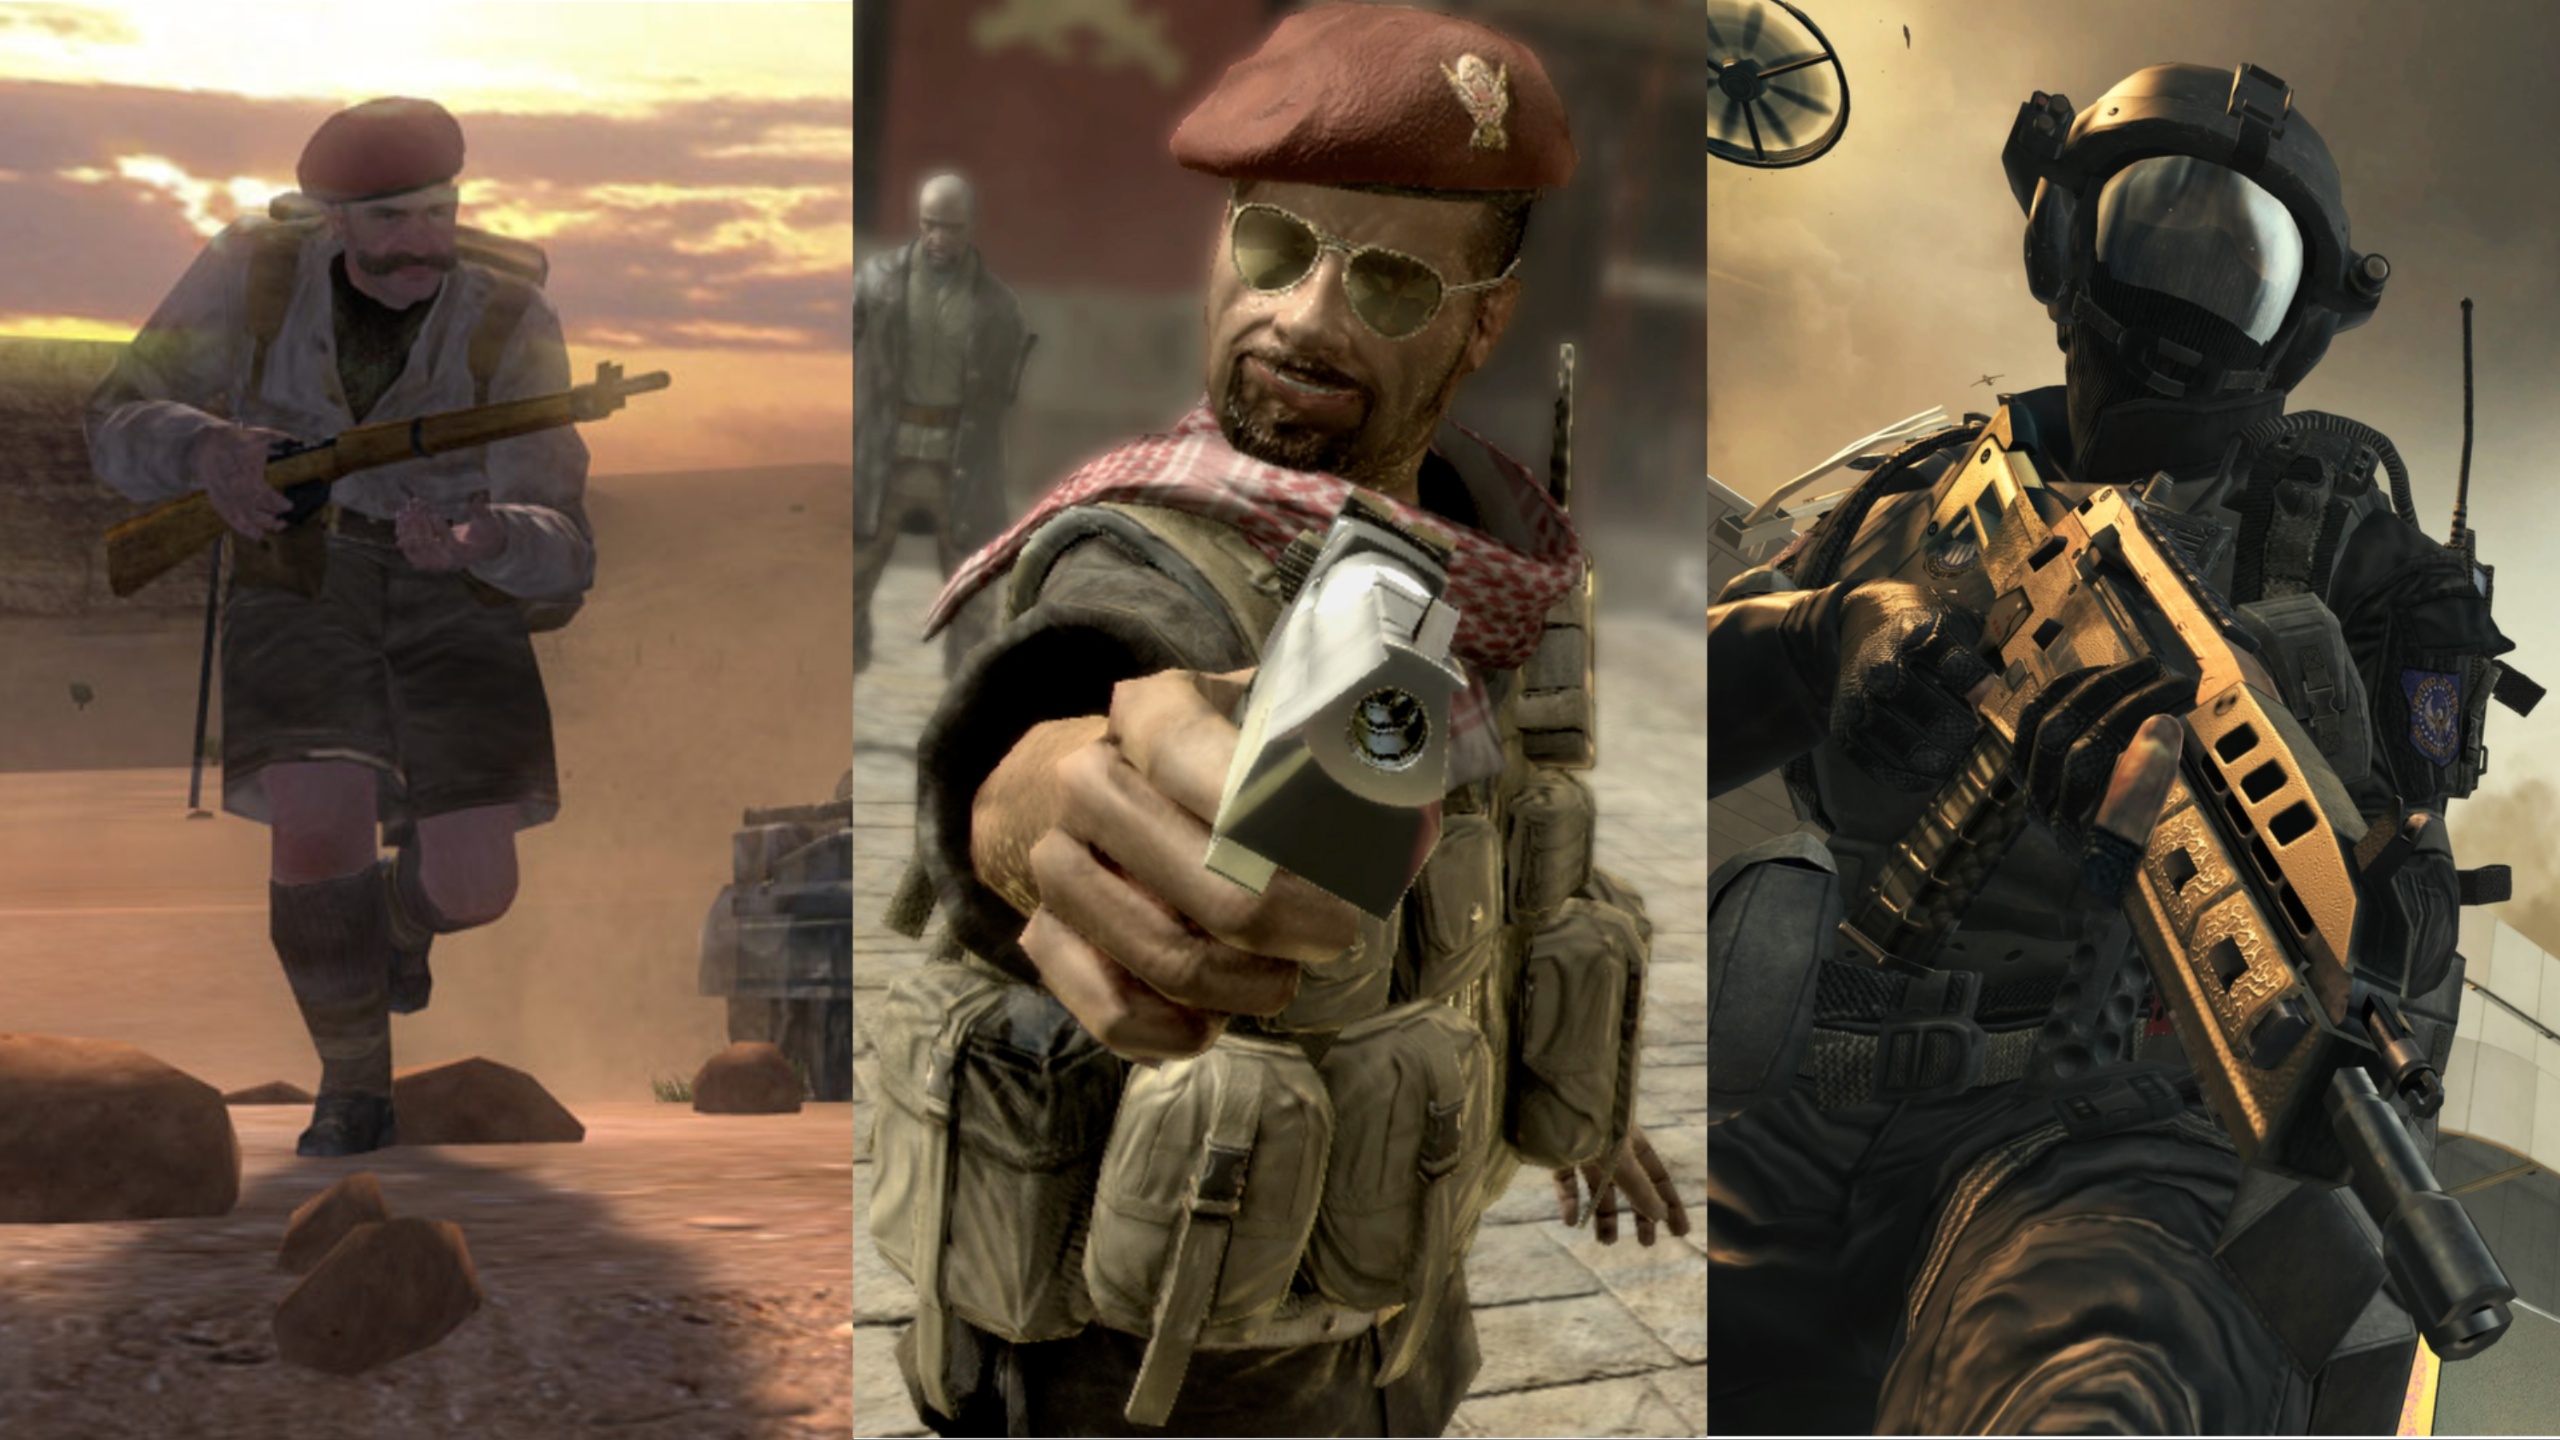 Treyarch could be releasing Call of Duty: World at War II in 2015